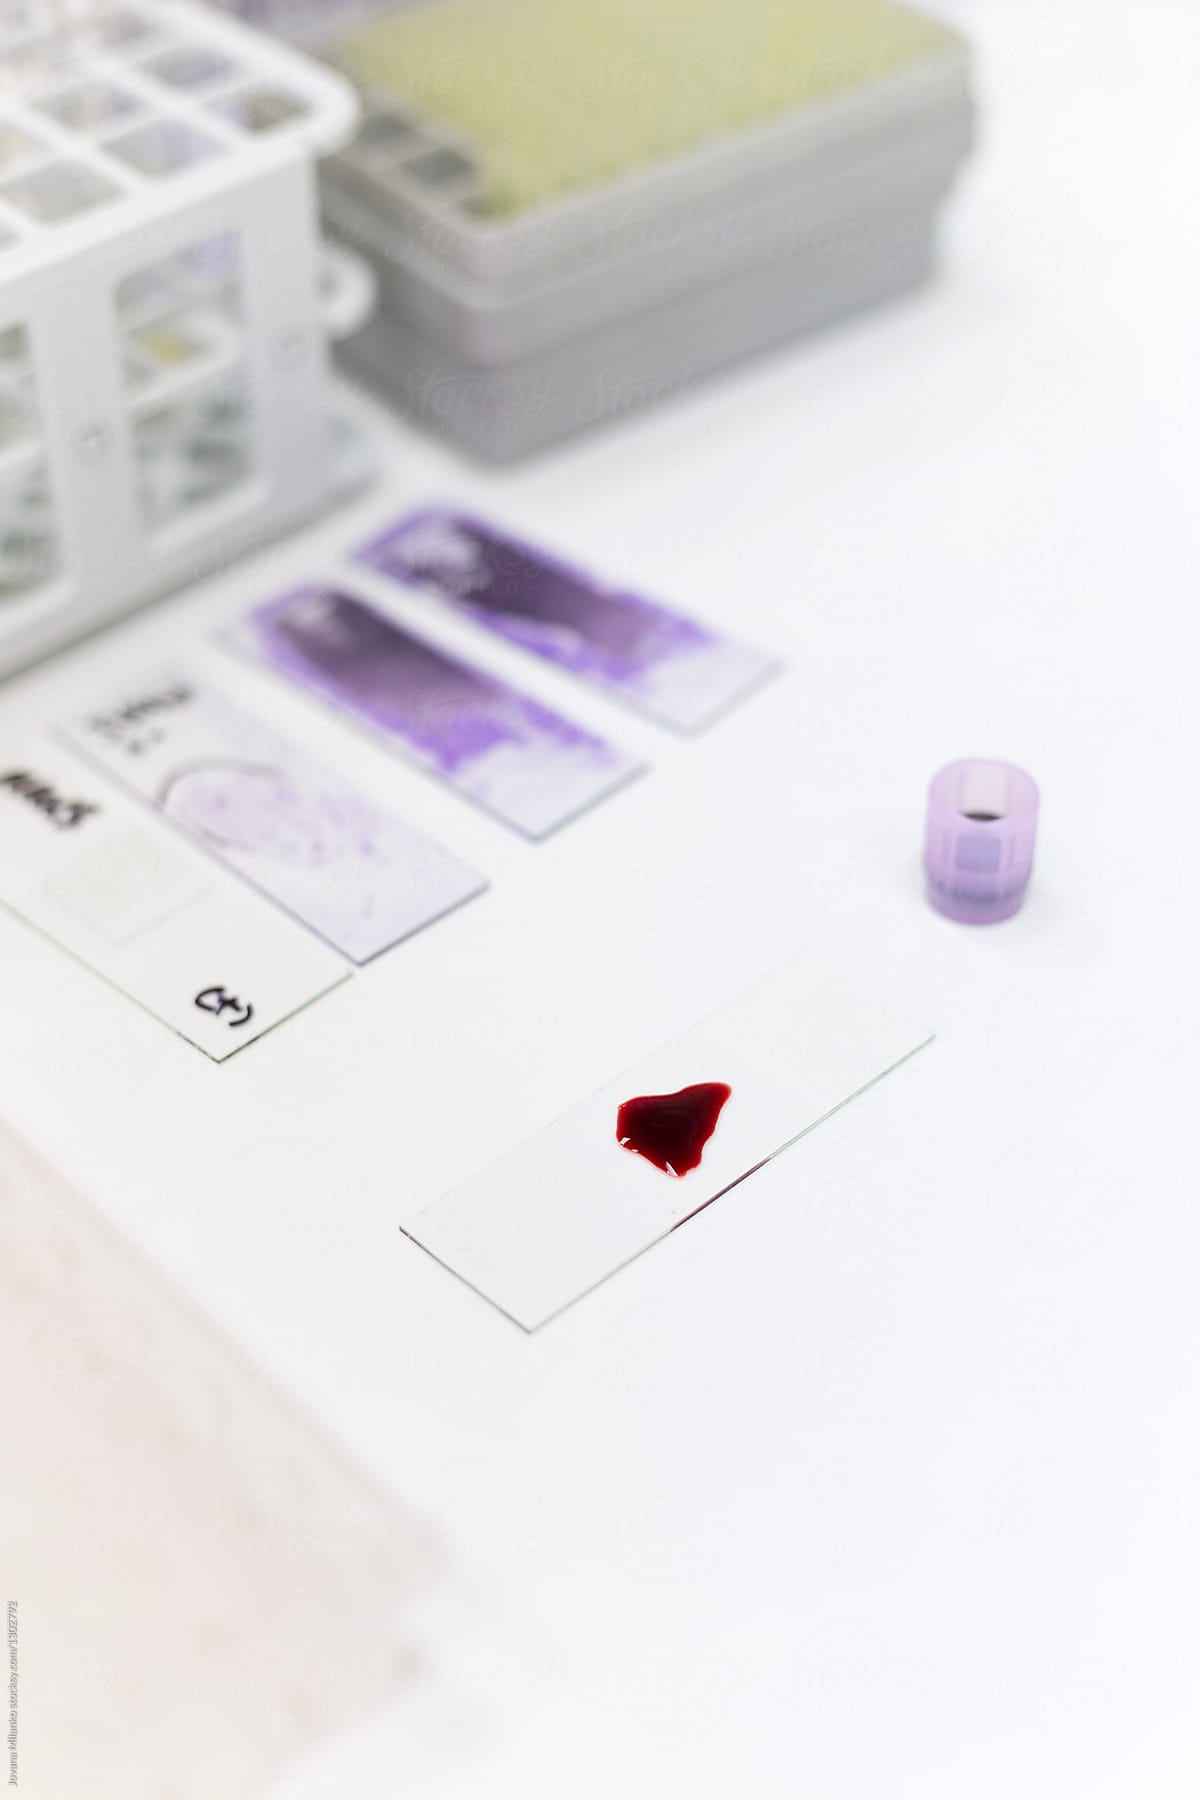 Blood samples being tested in a lab